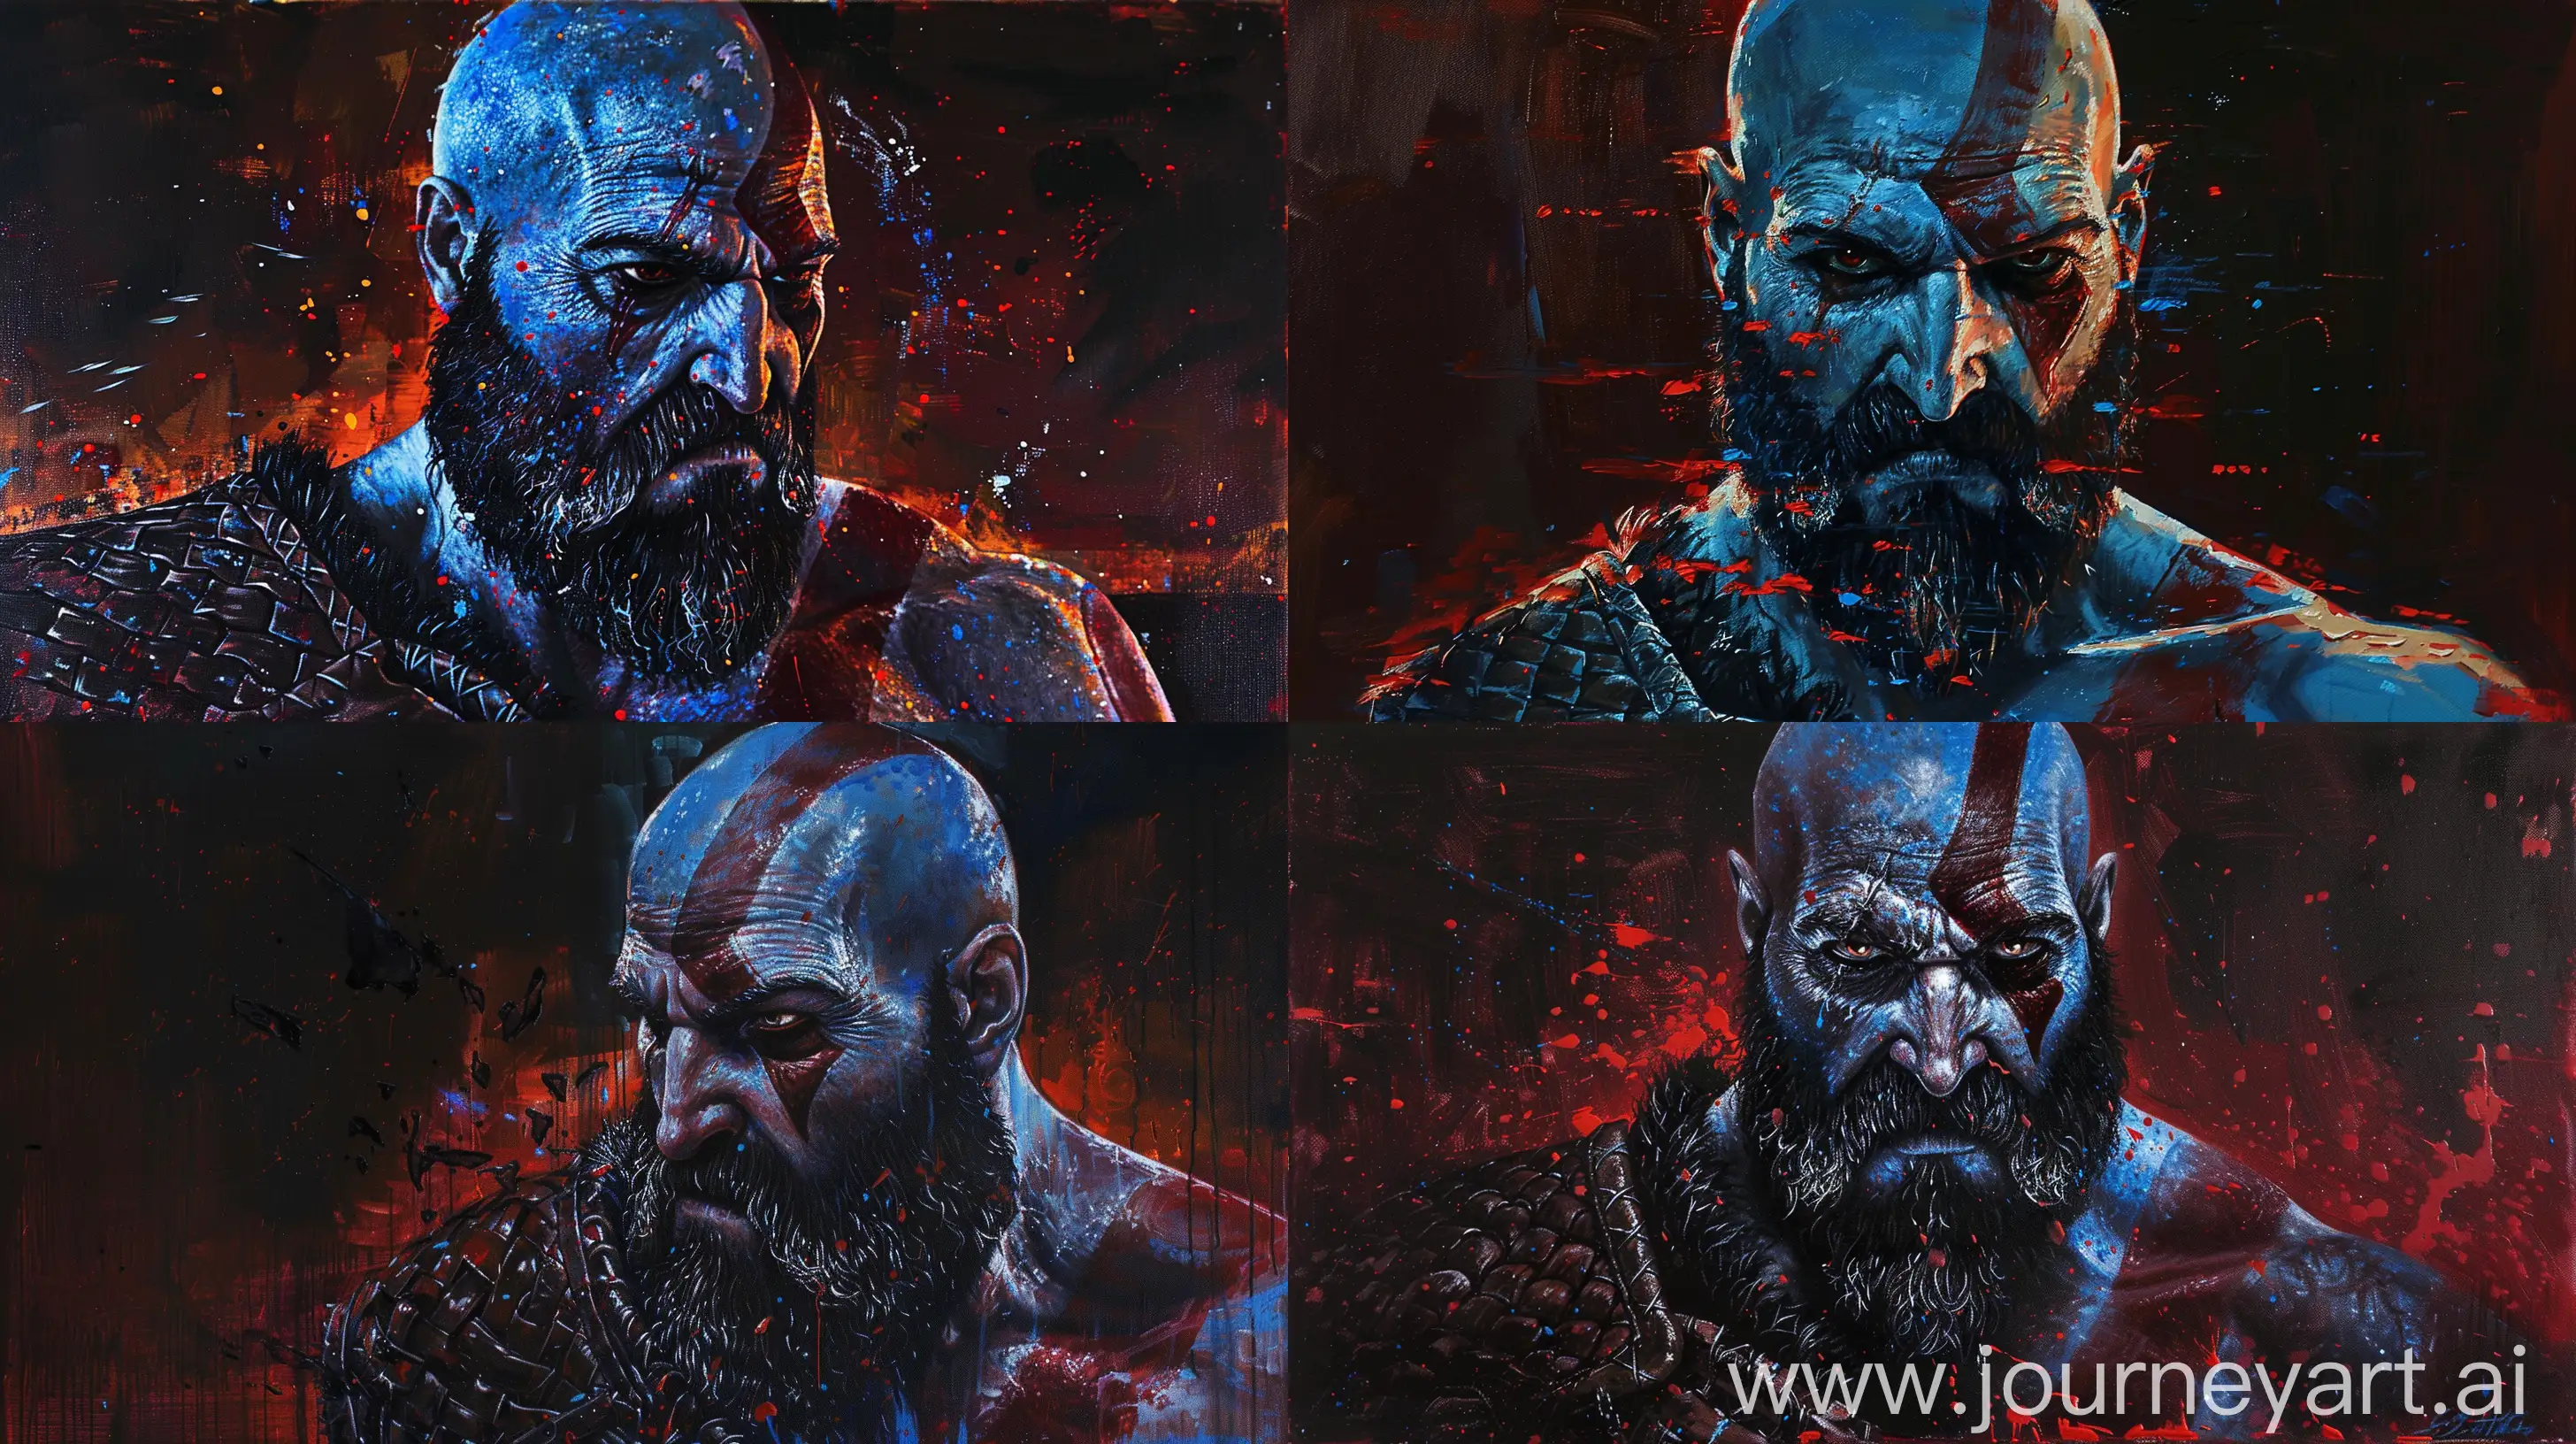 oil painting of kratos from god of war in star wars style in dark colors with metallic blues and red accents. The background is dark with a red hue, The overall mood of the painting is dramatic, hinting at a moment of significance for the character. There are also touches of bright skin tone on face with visible brush strokes --ar 16:9 --c 5
